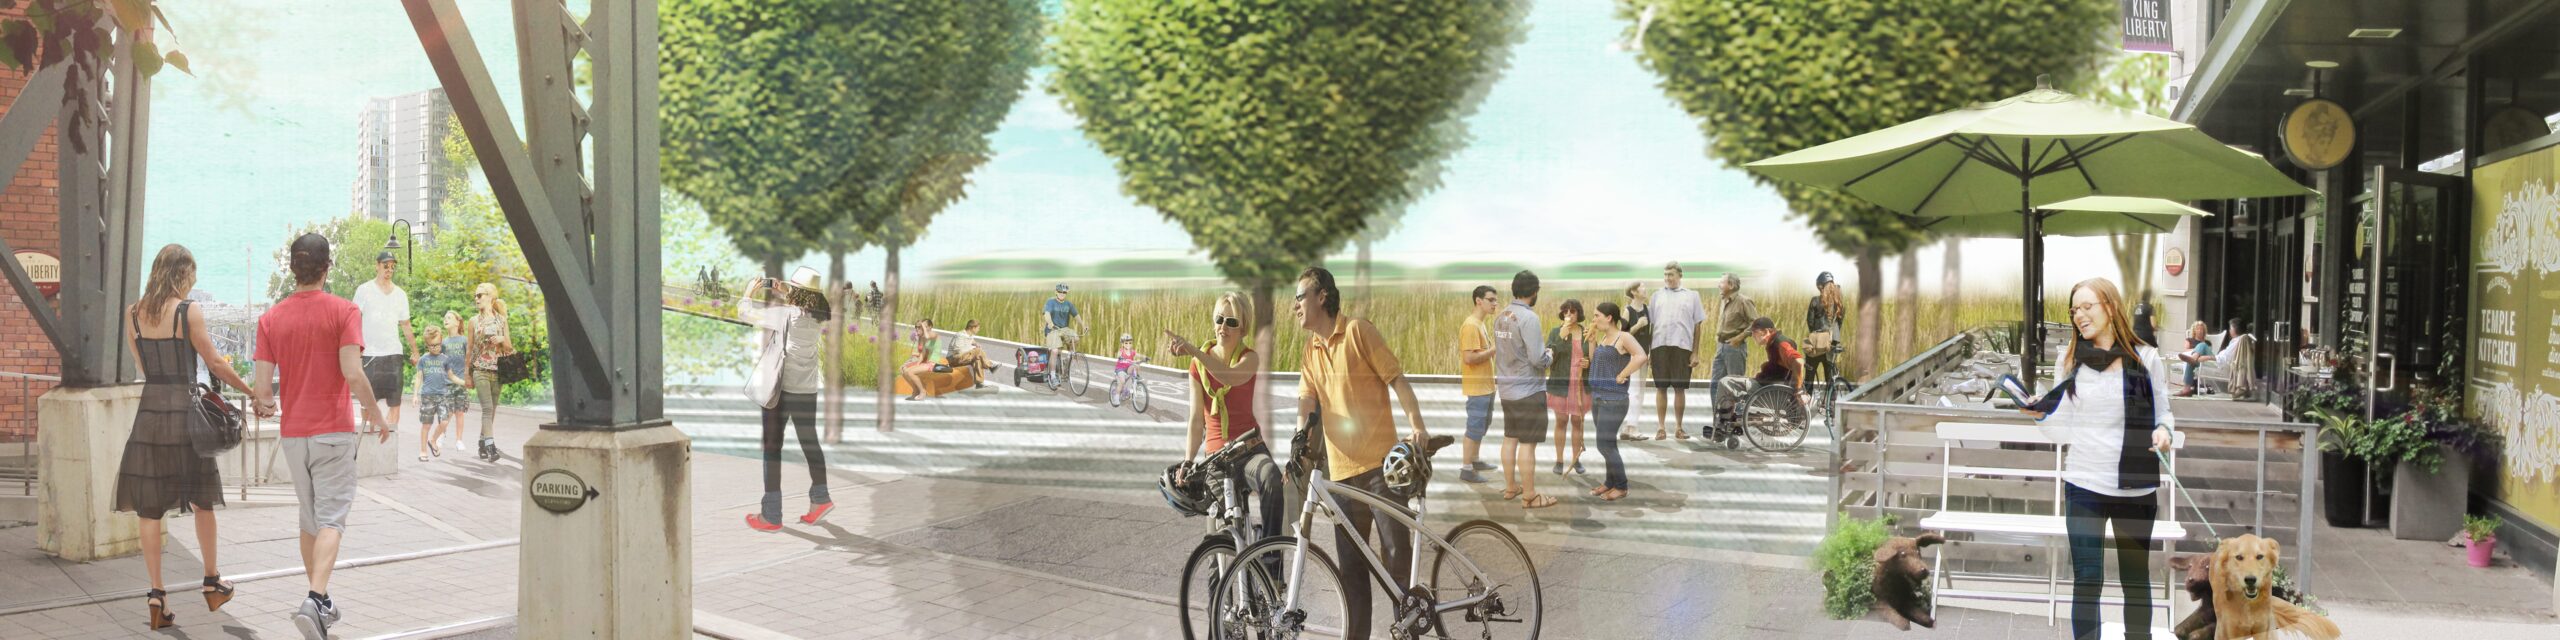 Street view rendering of the King High Line